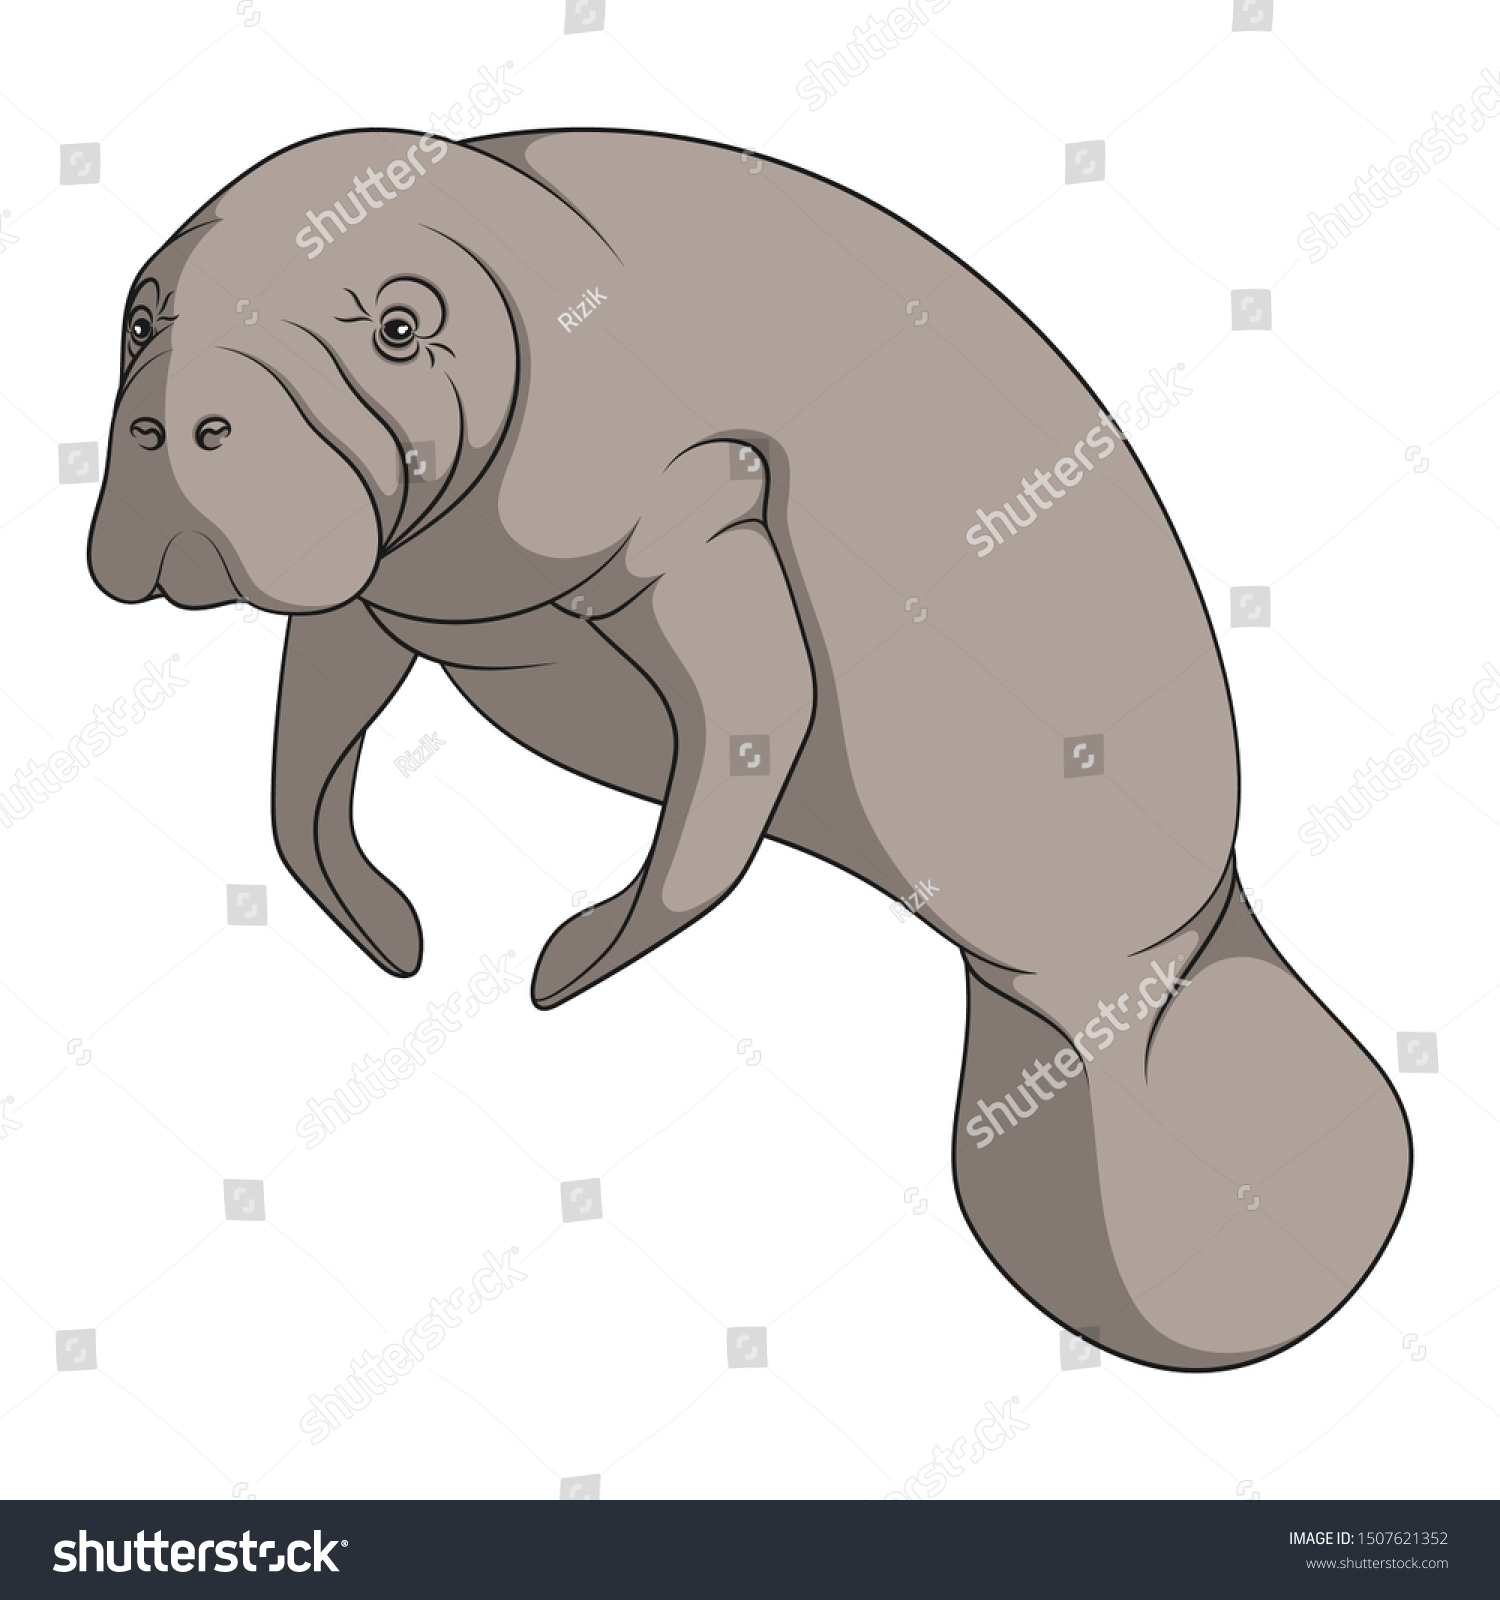 SVG of Color illustration with manatee, a sea cow. Isolated vector object on a white background. svg